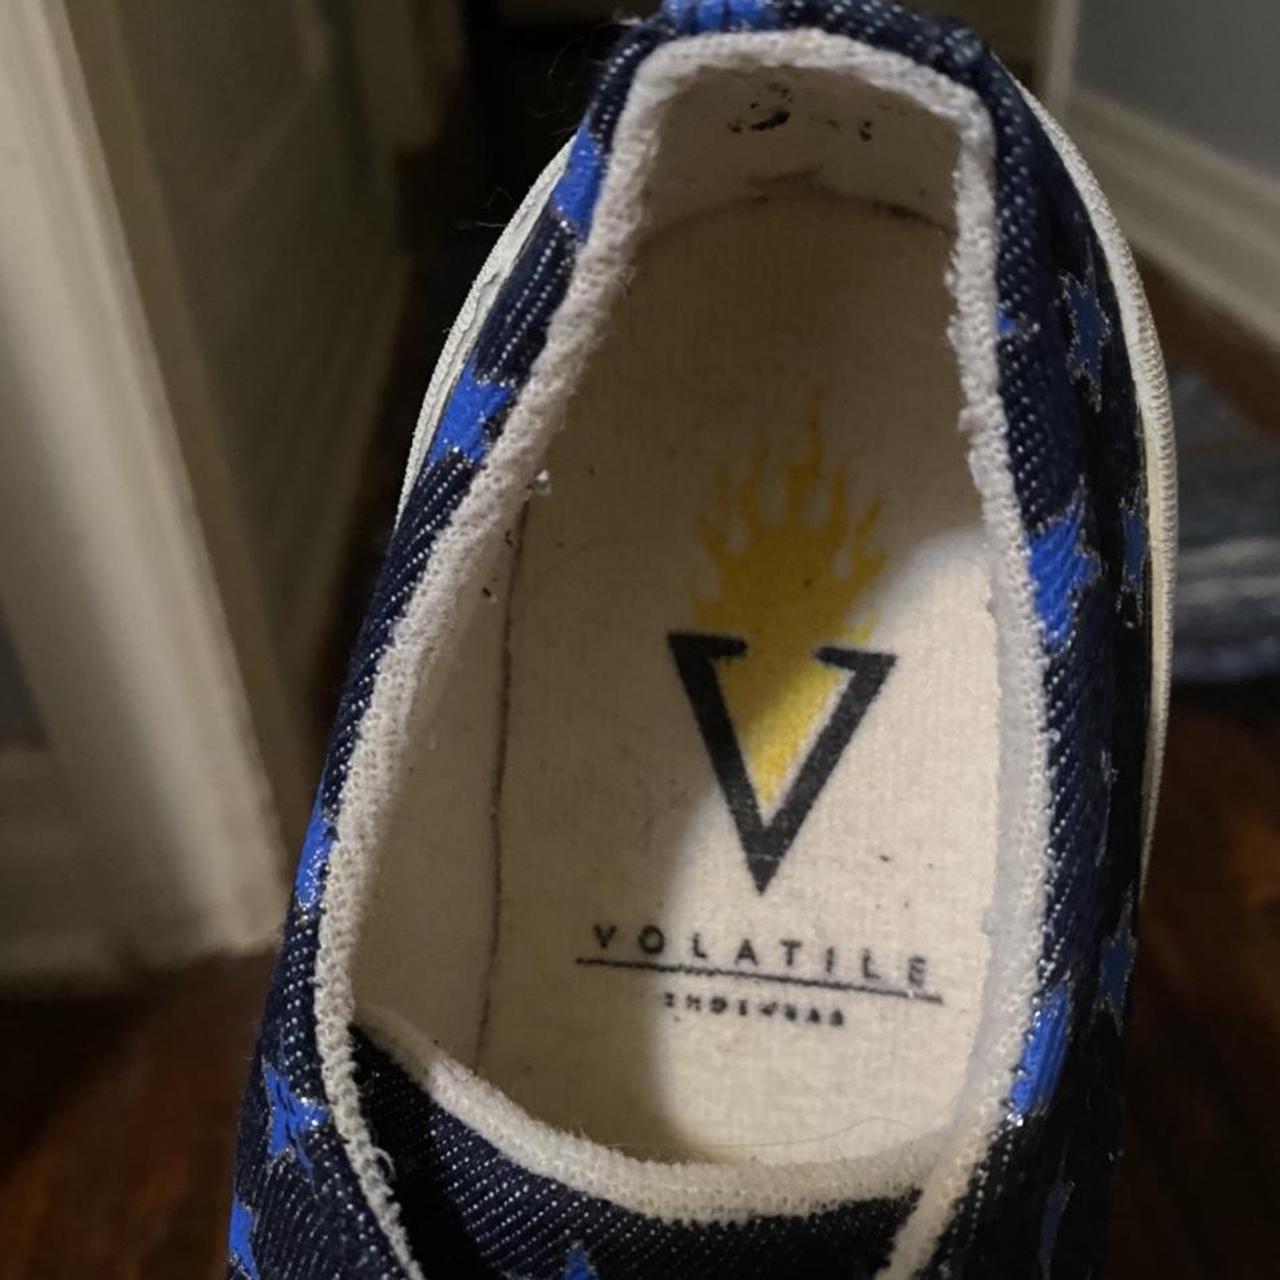 Volatile Platform Sneakers Has some flaws with - Depop